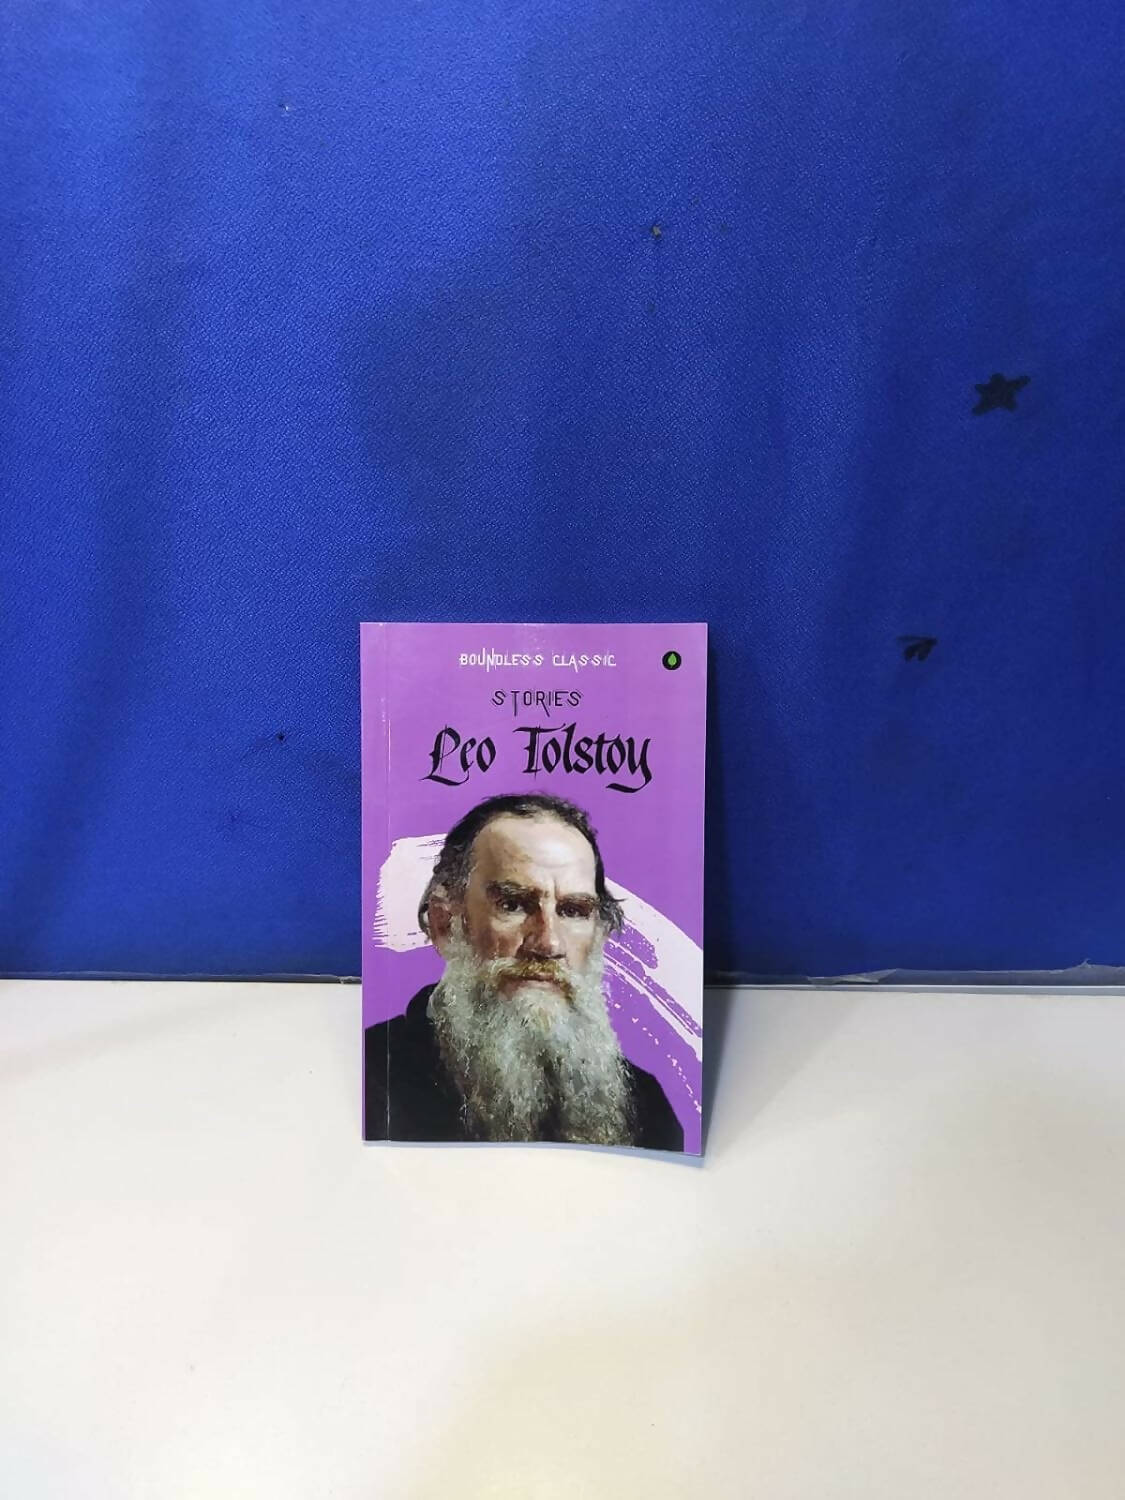 Boundless Classic Stories : Leo Tolstoy